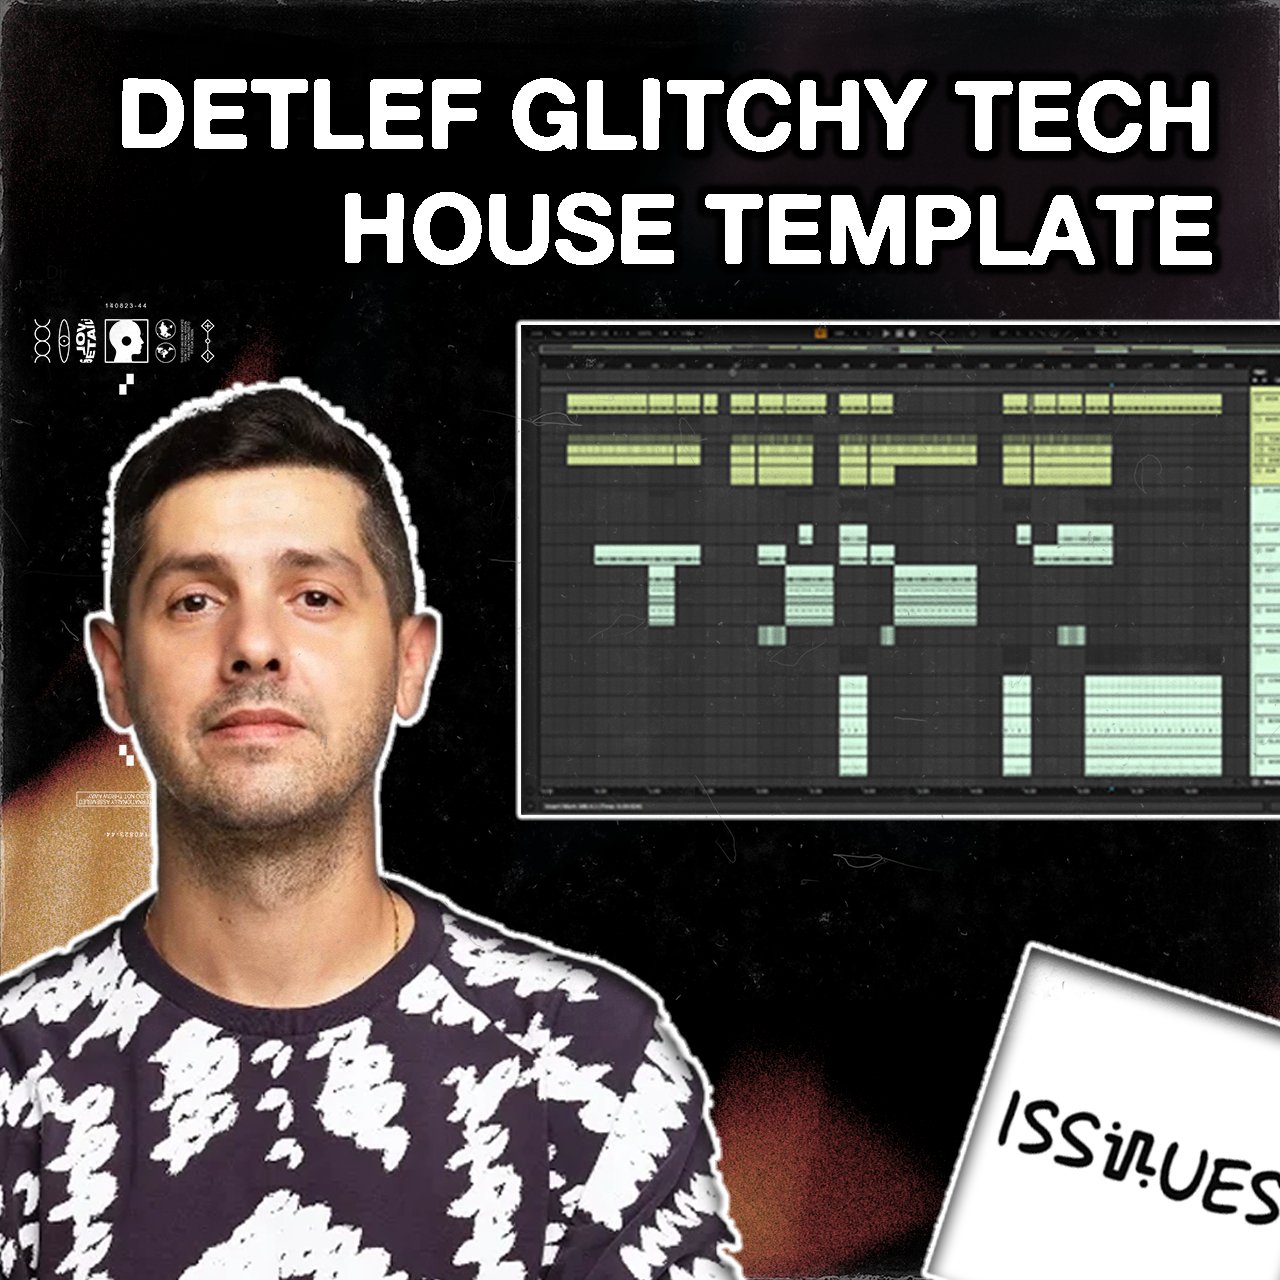 Detlef / Issues inspired Ableton Project - project_bass - Tunebat Marketplace